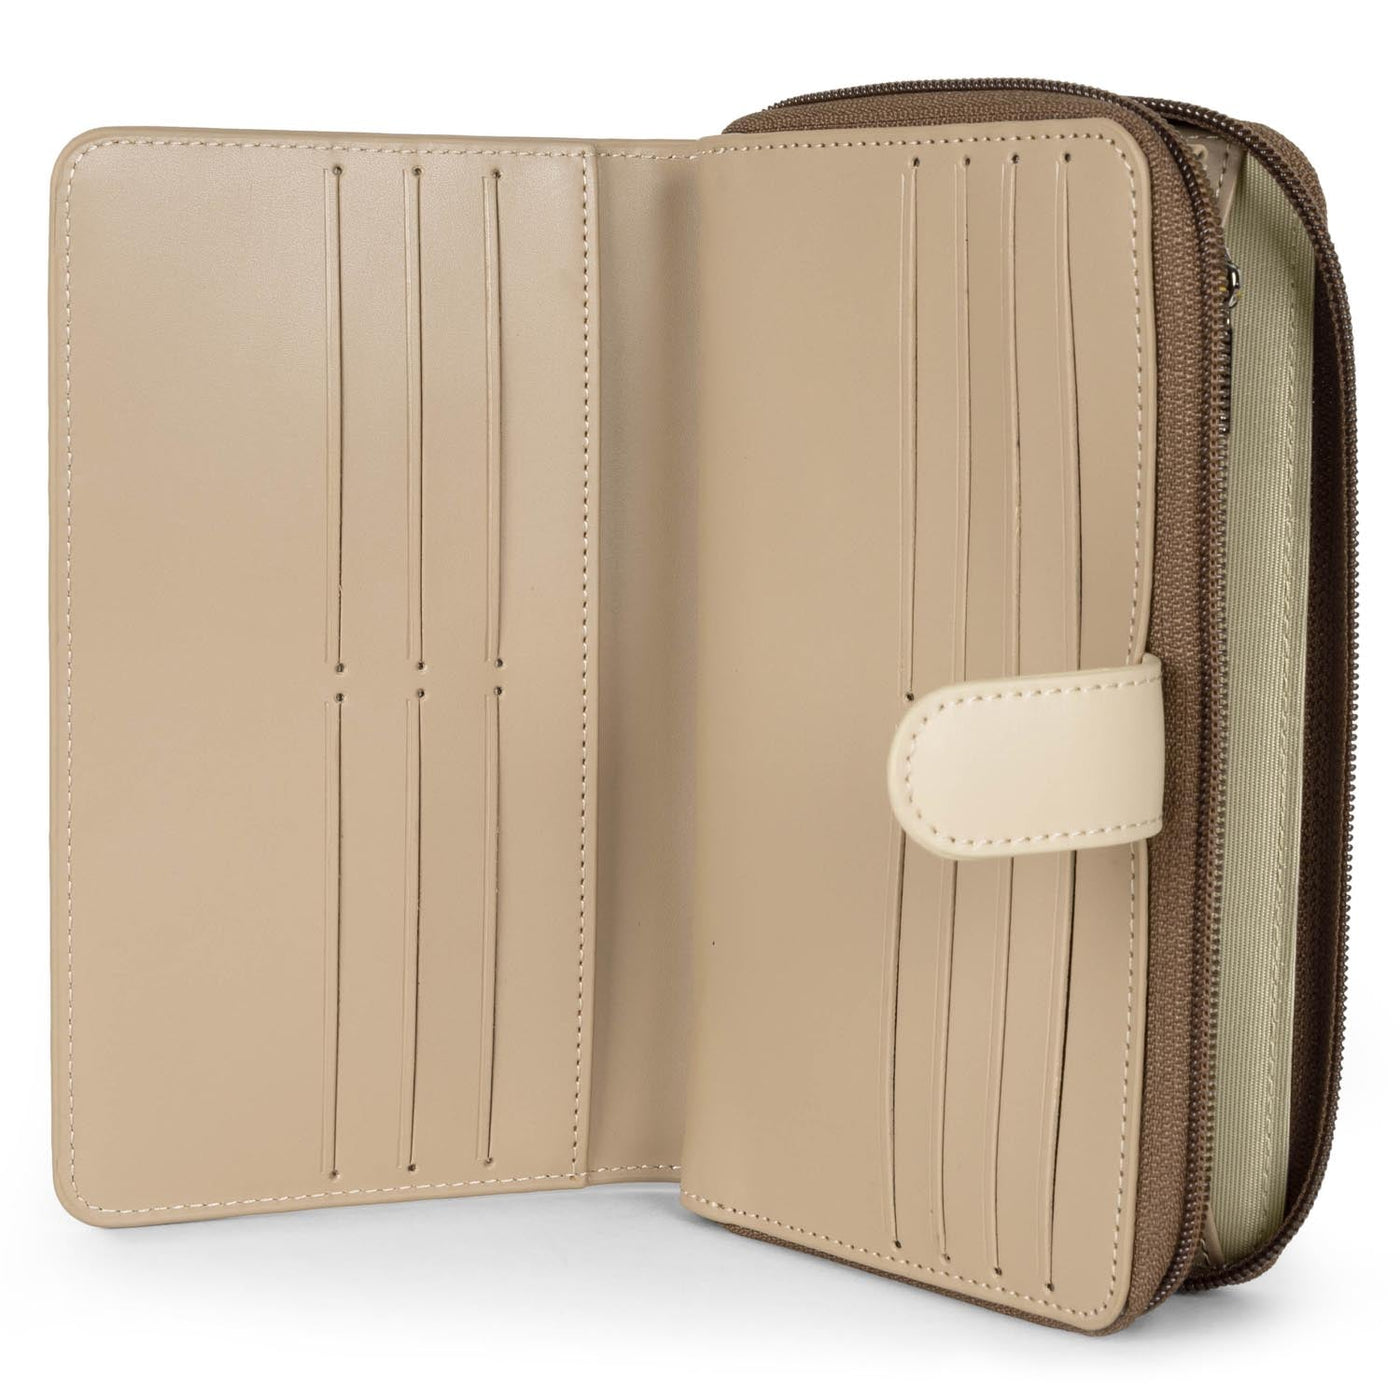 back to back organizer wallet - smooth #couleur_nude-nude-clair-vison